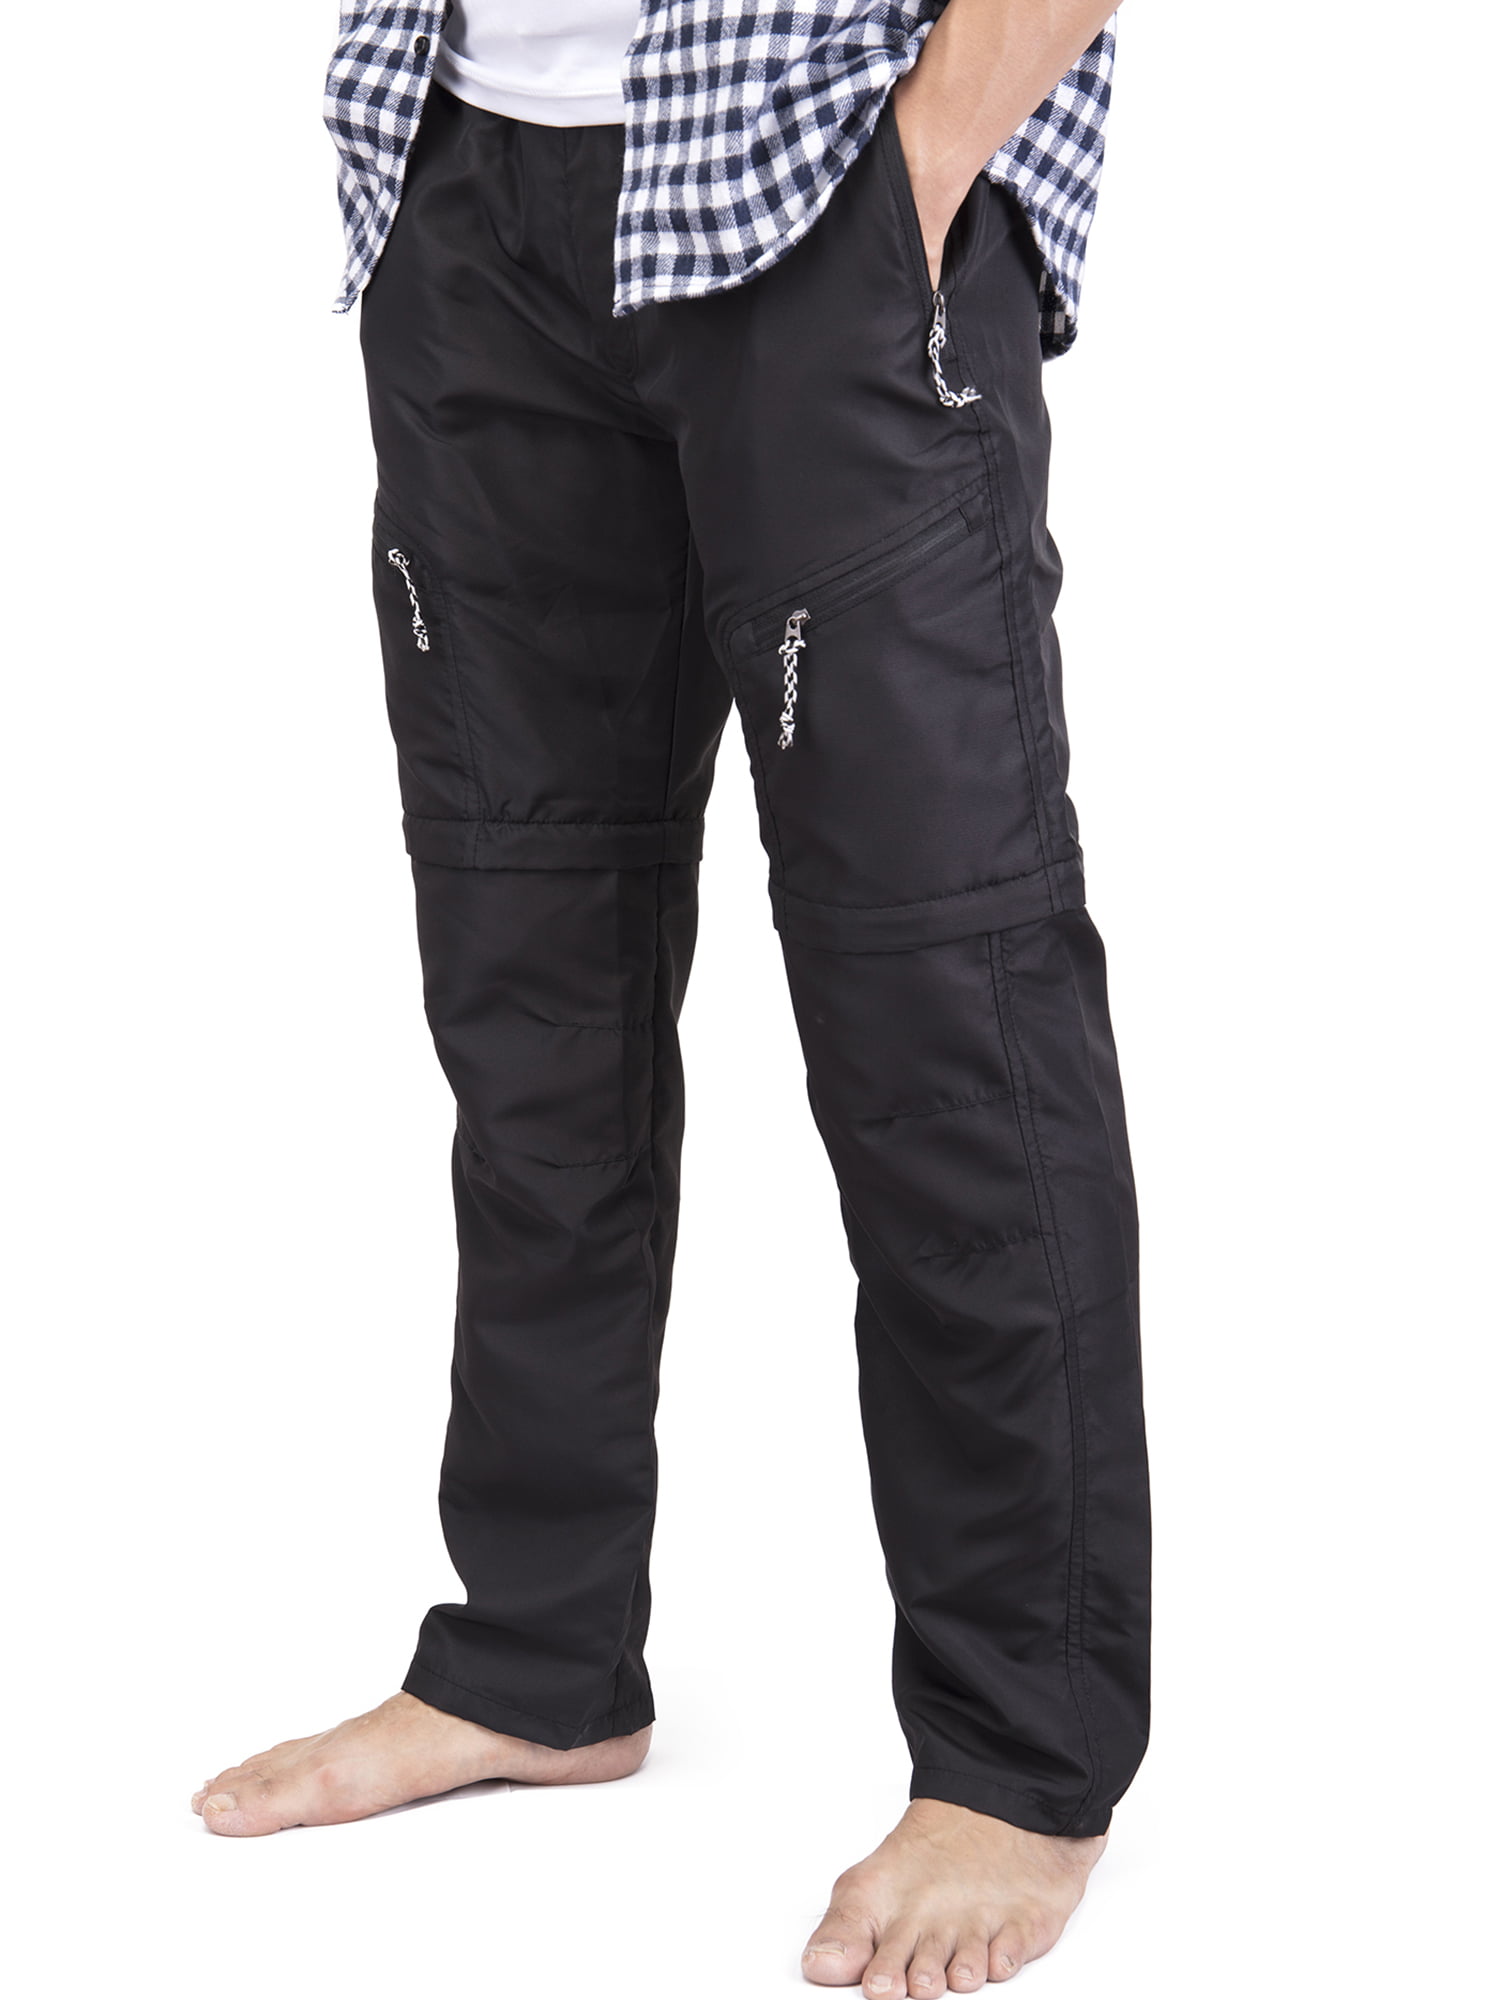 Men's Outdoor Pants Long Trousers Straight Cotton Multi-pocket Cargo Casual New 